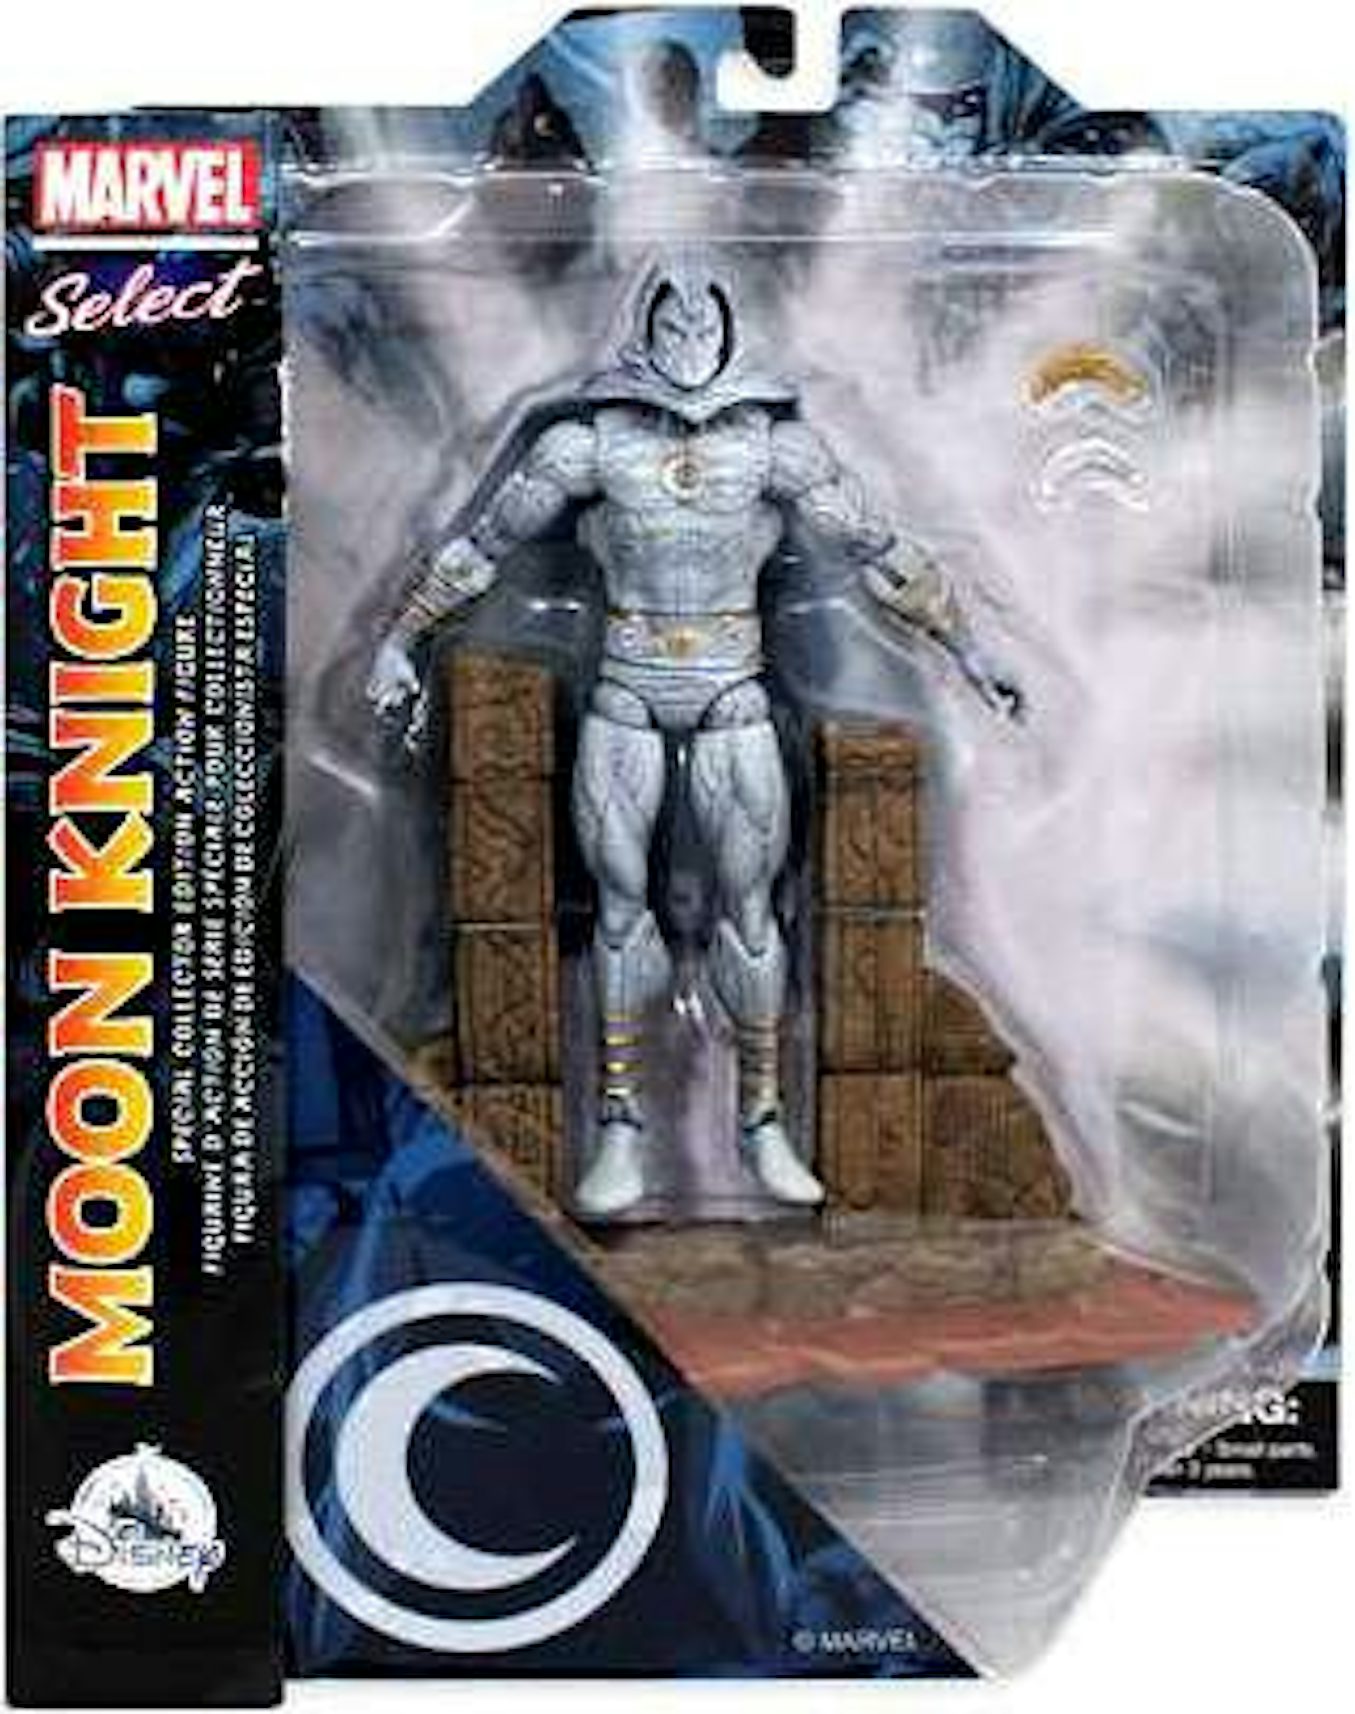 https://images.stockx.com/images/Diamond-Select-Toys-Marvel-Select-Moon-Knight-Disney-Store-Exclusive-Action-Figure.jpg?fit=fill&bg=FFFFFF&w=1200&h=857&fm=jpg&auto=compress&dpr=2&trim=color&updated_at=1661736549&q=60